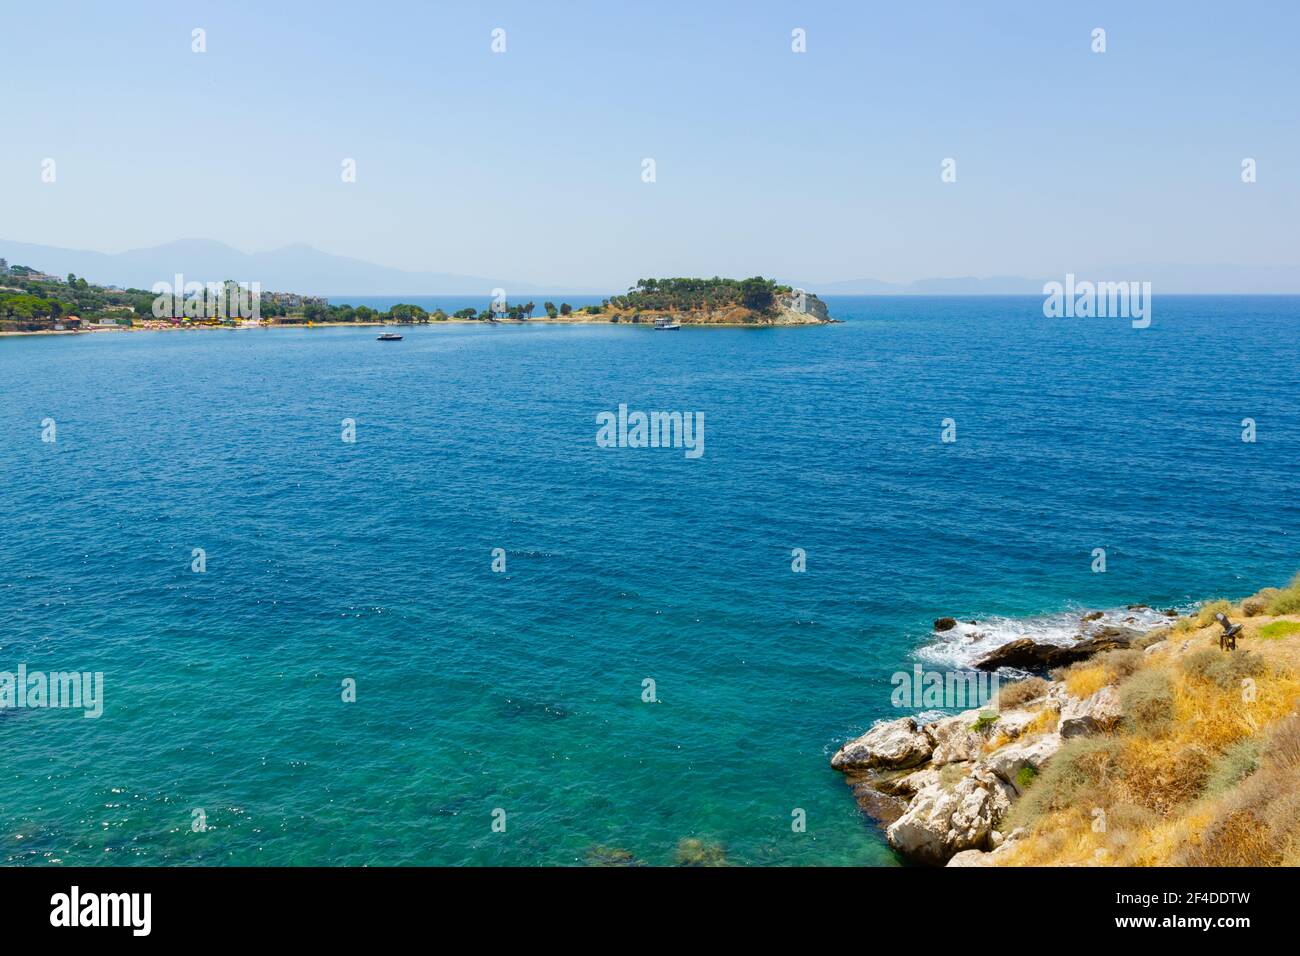 Horizontal view of the turquoise waters of the sea. Wild clifs in front of turquoise water. Summer vacation by the sea Stock Photo